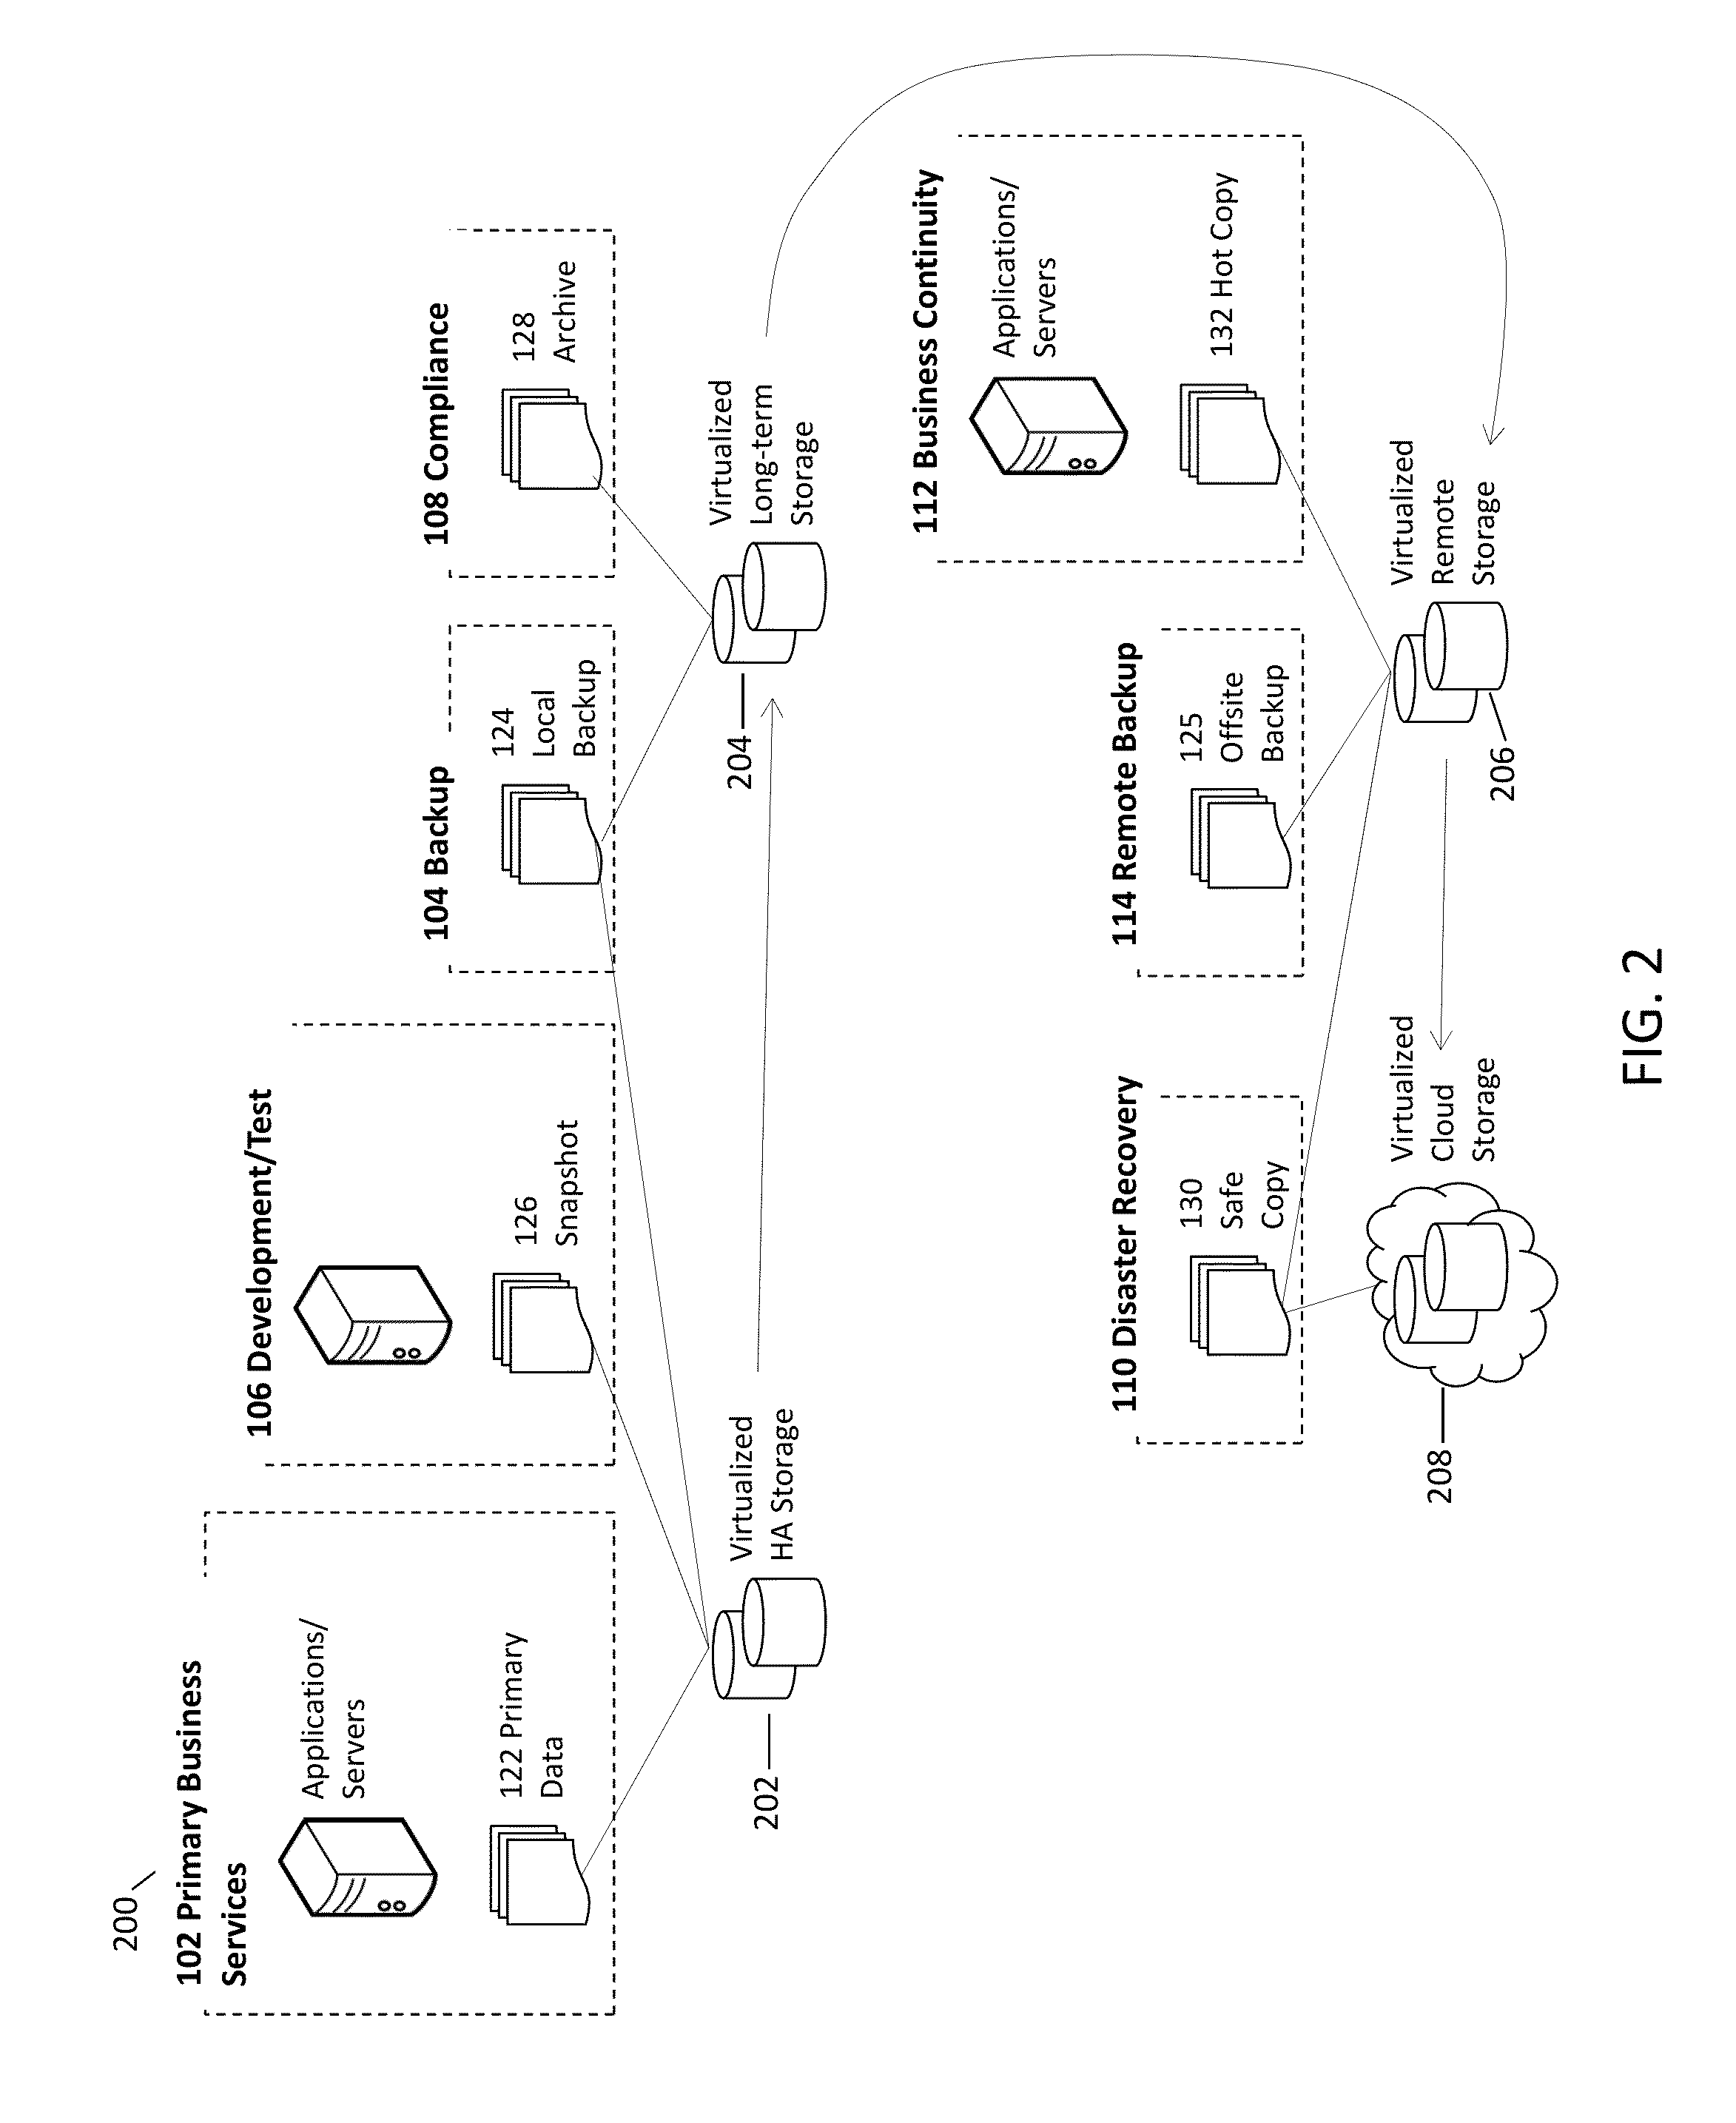 System and method for efficient database record replication using different replication strategies based on the database records